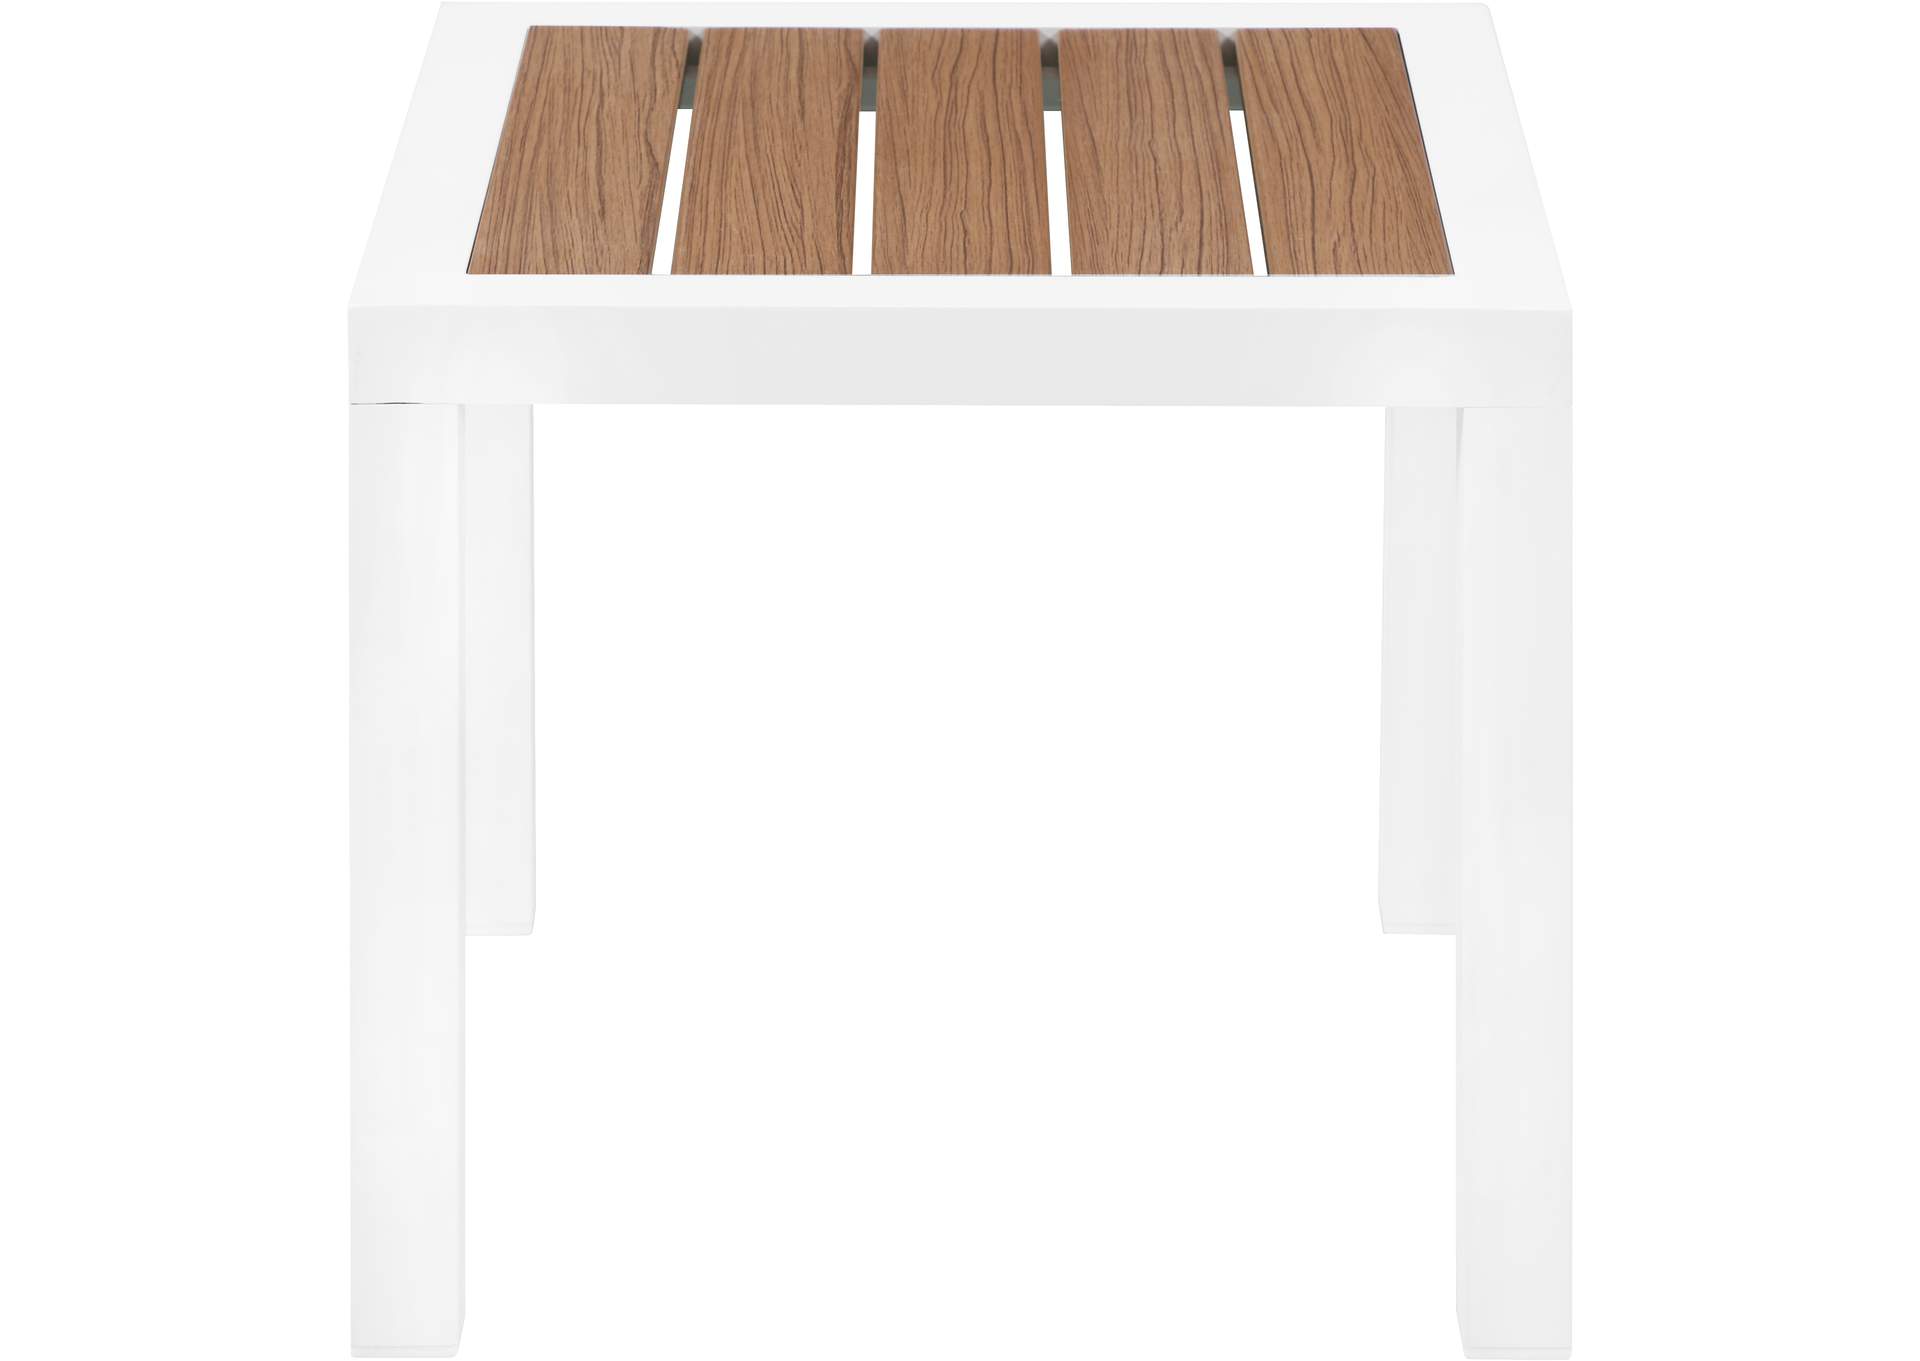 Nizuc Brown Wood Look Accent Paneling Outdoor Patio Aluminum End Table,Meridian Furniture